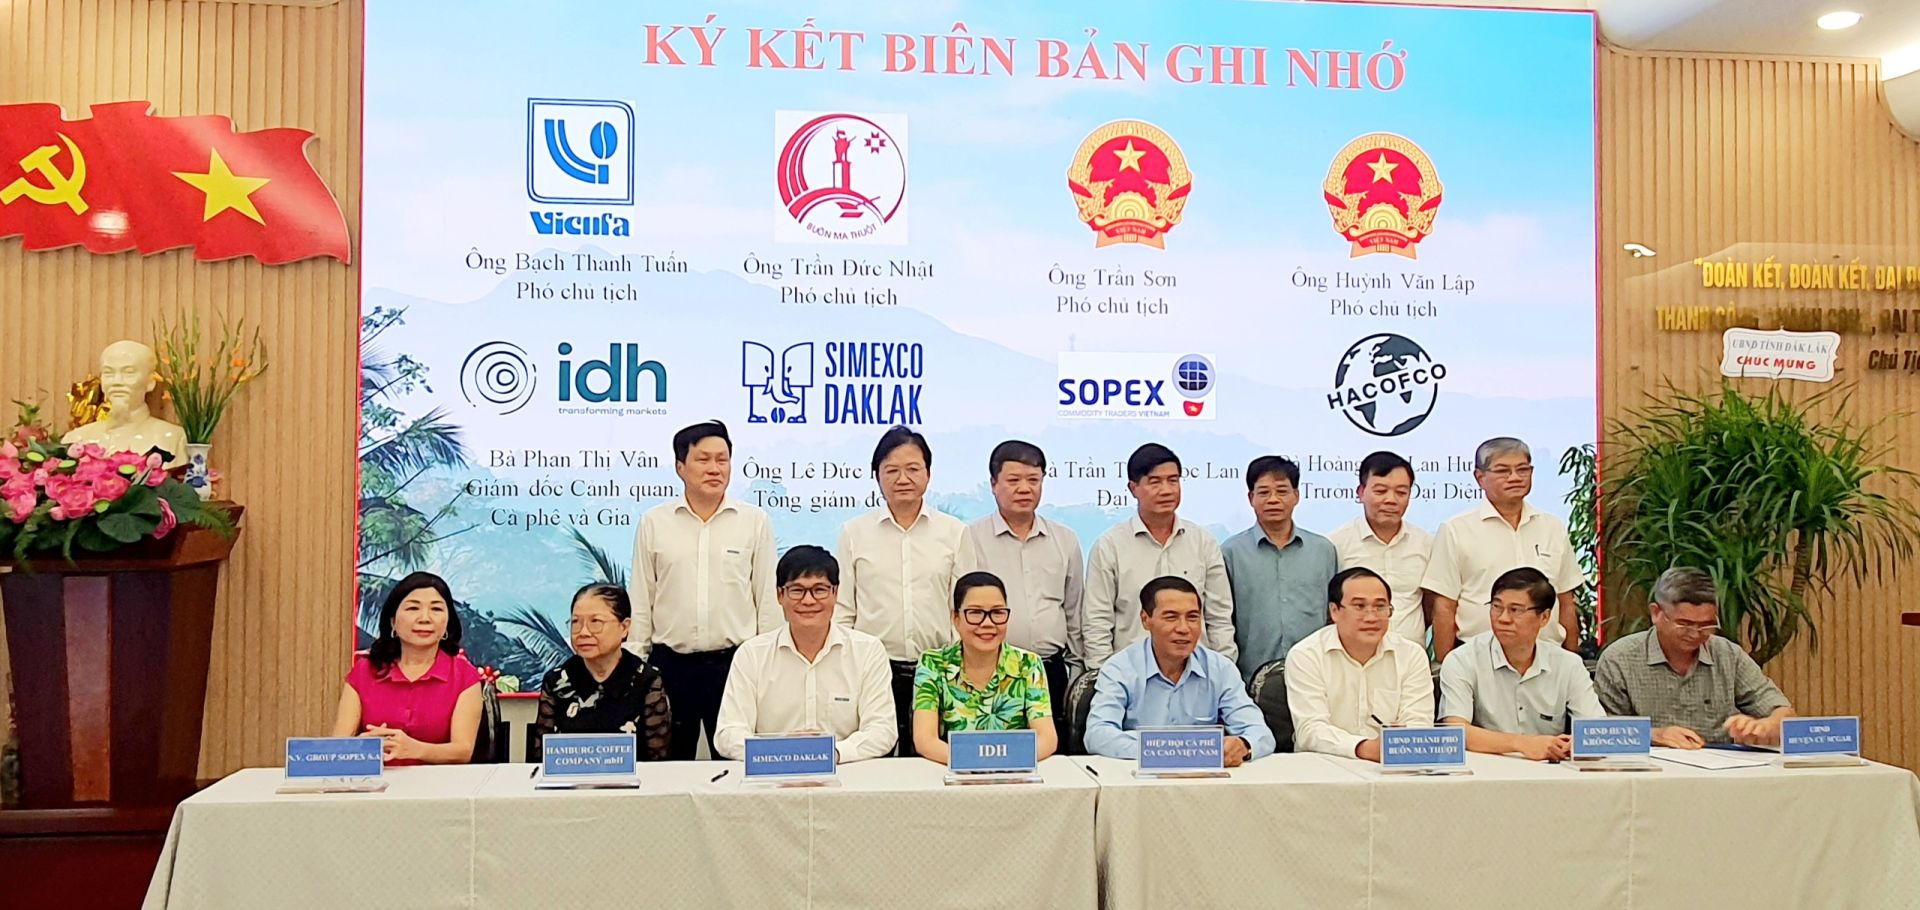 Leaders of Simexco Dak Lak and 8 units, including associations, non-governmental organisations and local authorities, signed a memorandum of understanding on ensuring coffee production in compliance with EUDR